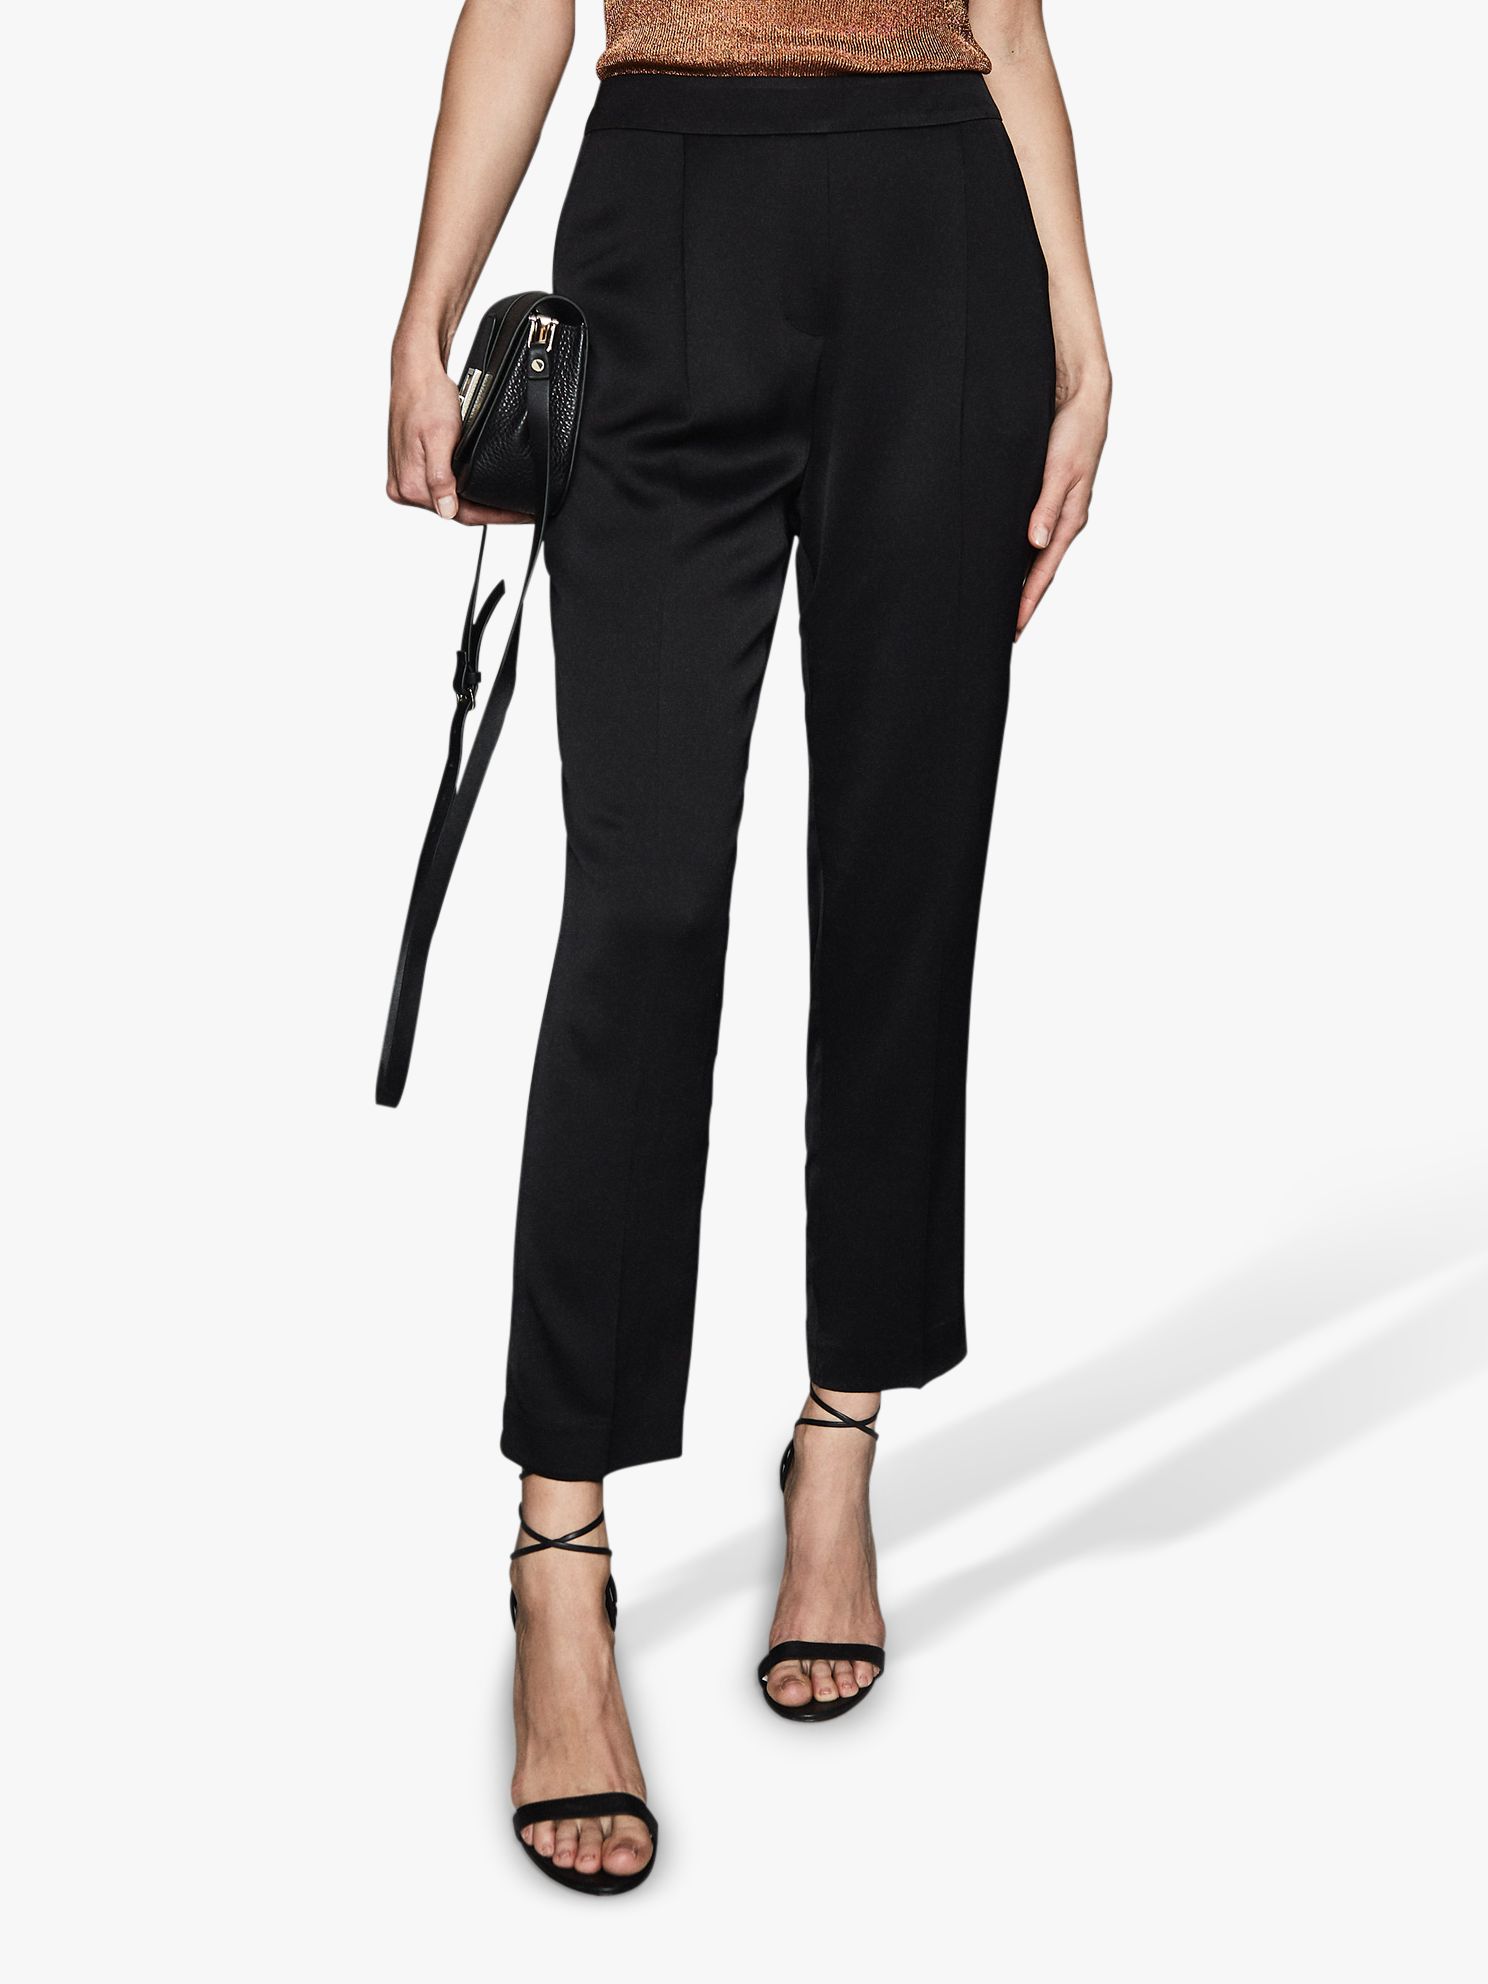 Reiss Reese Tapered Trousers, Black at John Lewis & Partners